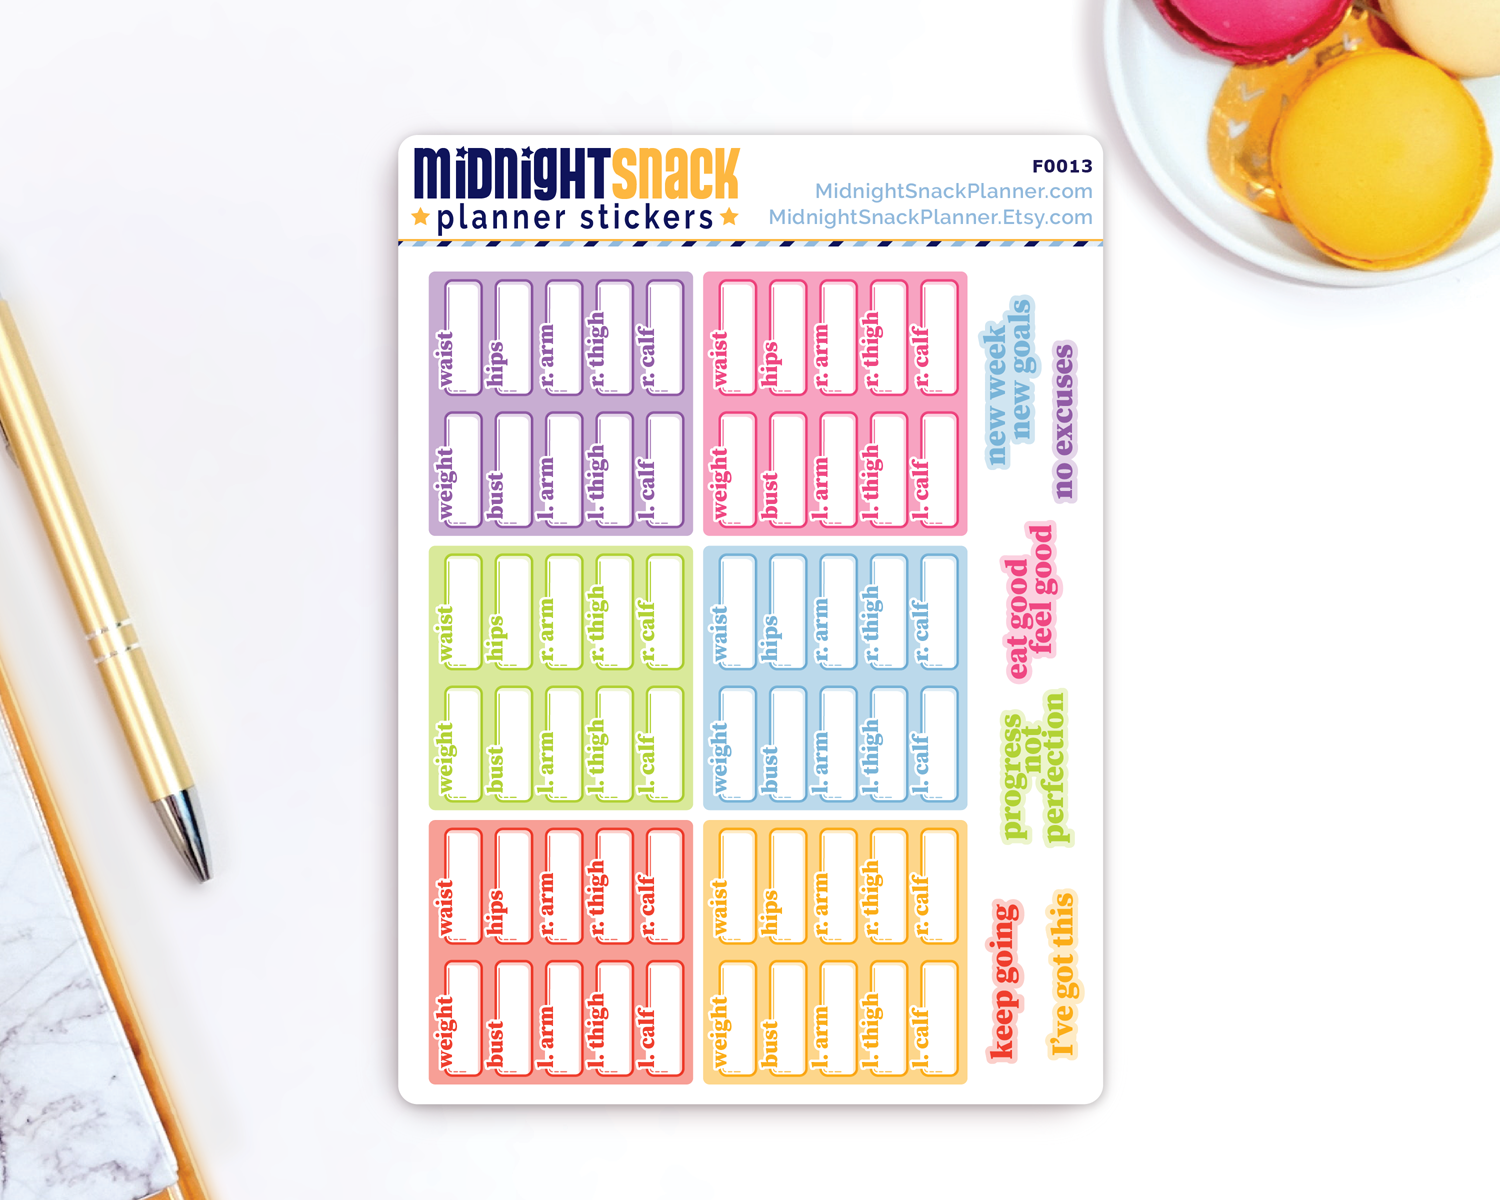 Body Measurements Tracker: Fitness and Exercise Planner Stickers